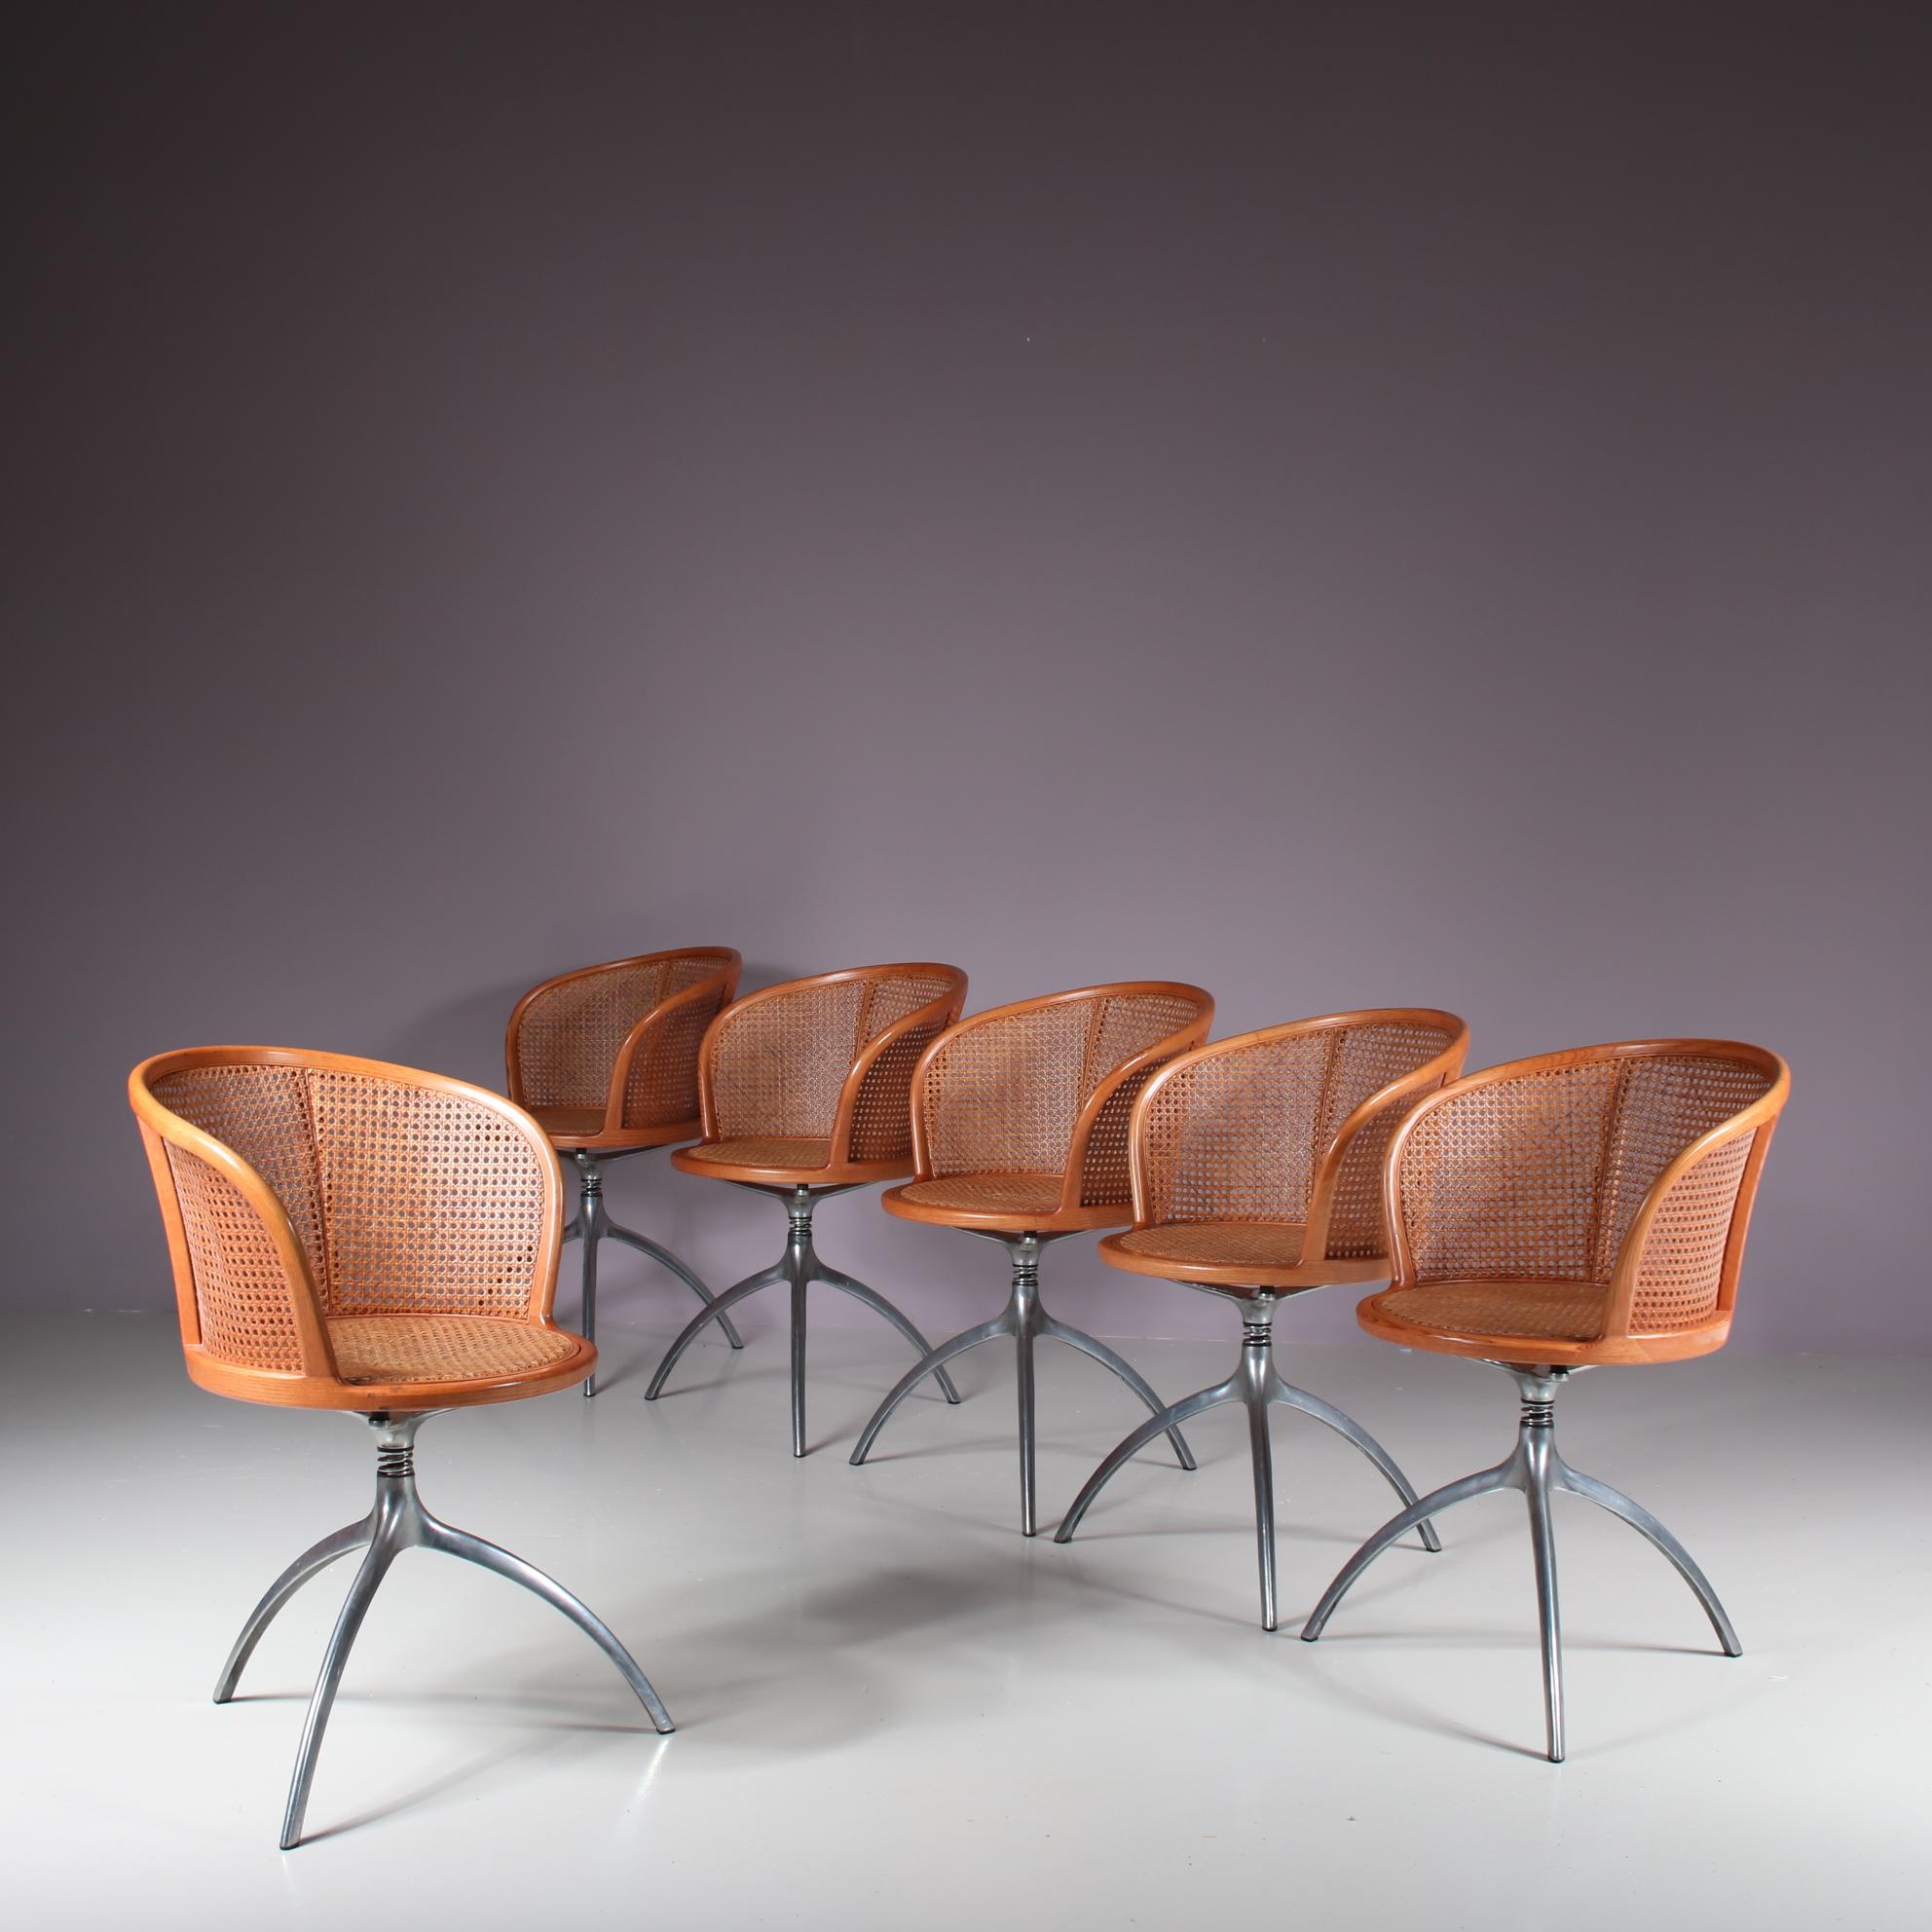 Italian Set of 6 “Young Lady” Chairs by Paolo Rizzatto for Alias, Italy 1990